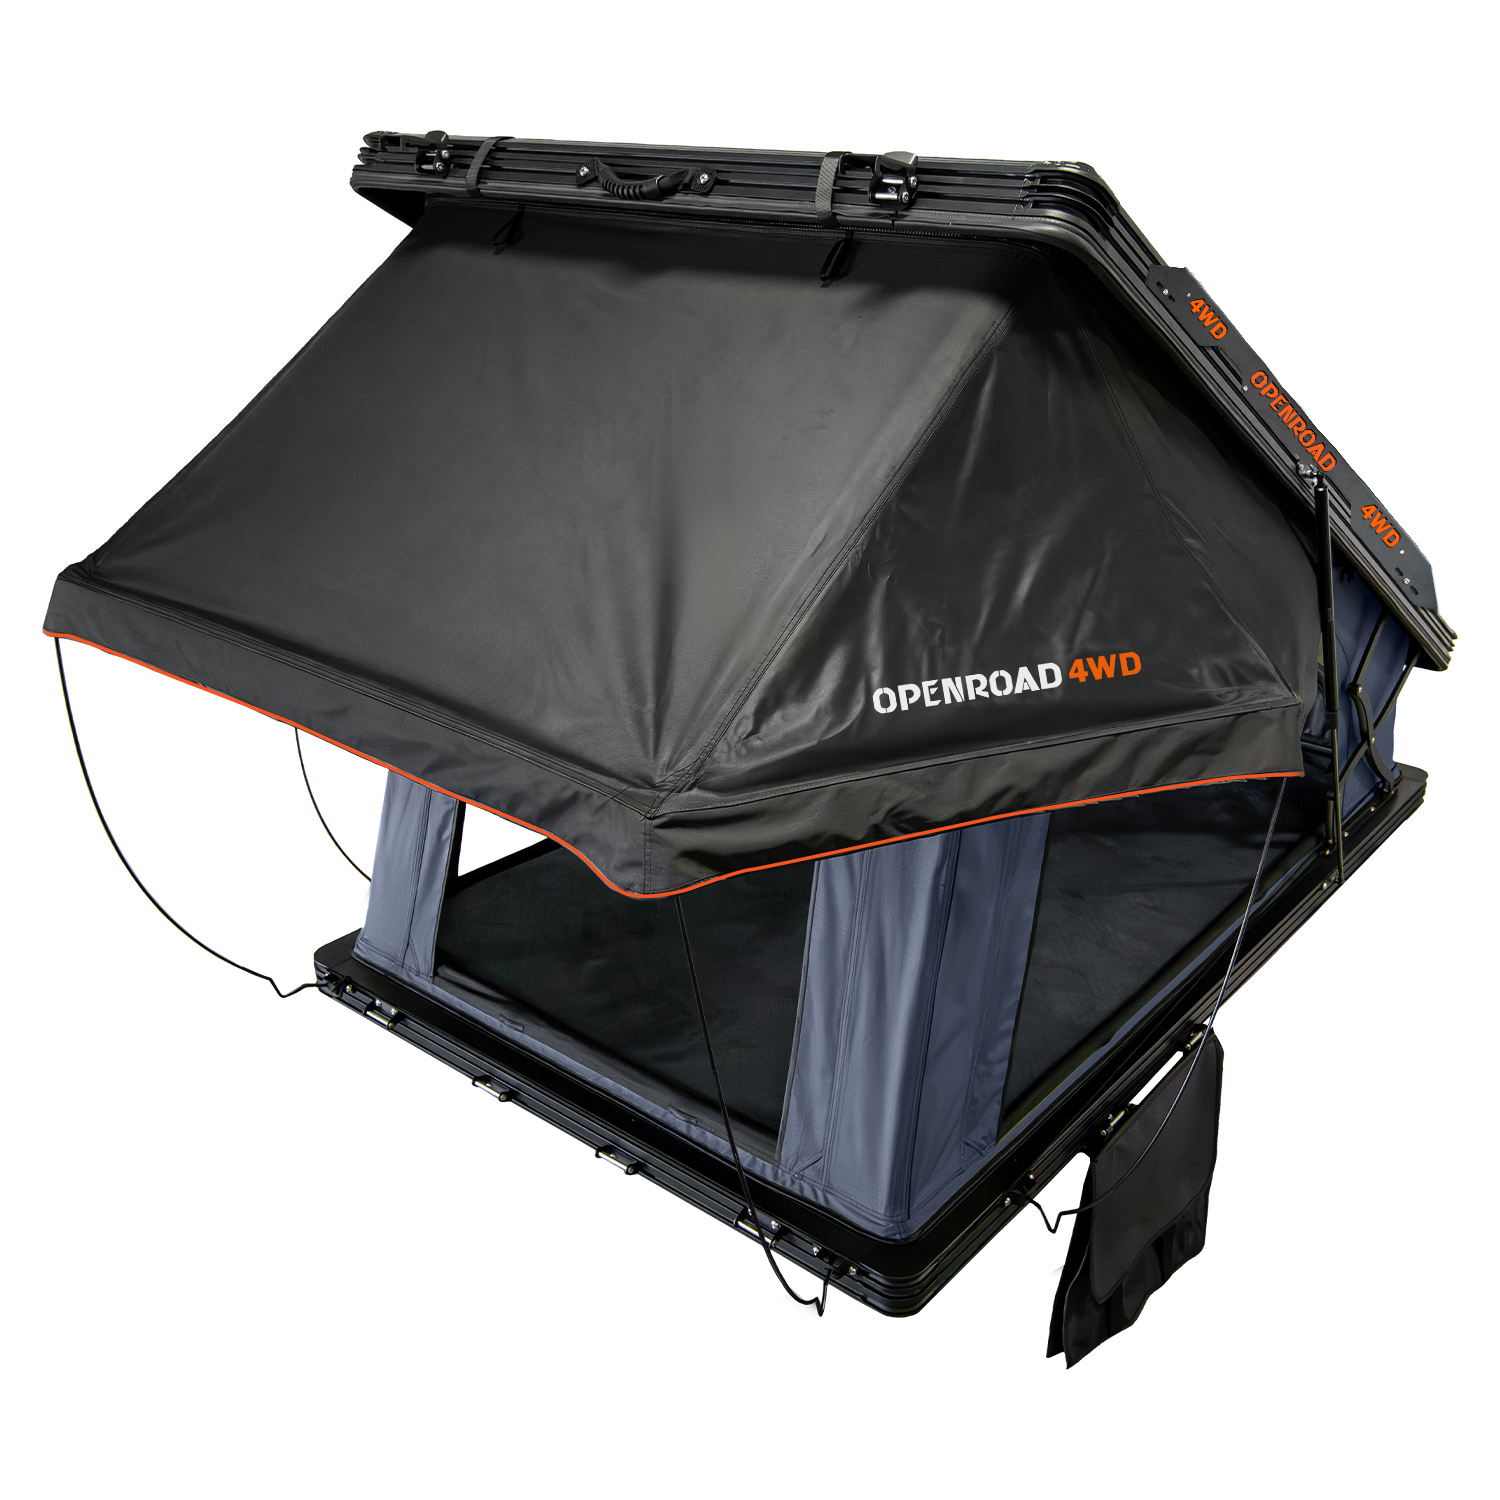 OPENROAD Aluminum Hard Shell Roof Top Tent-PeakRoof LT Series  openroad4wd.com   